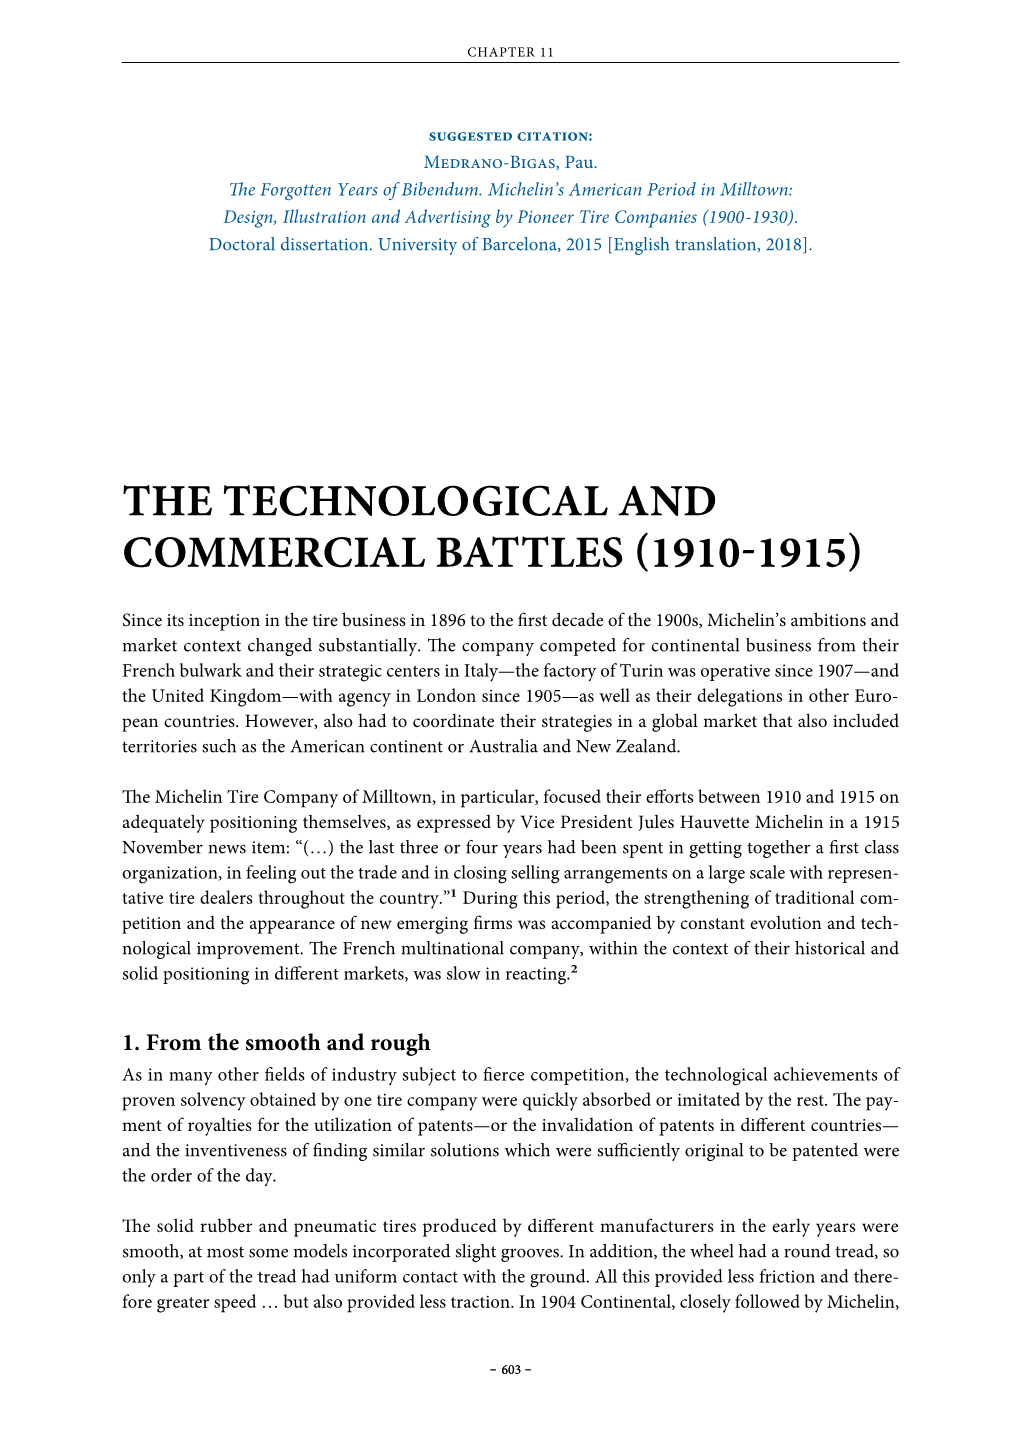 The Technological and Commercial Battles (1910-1915)